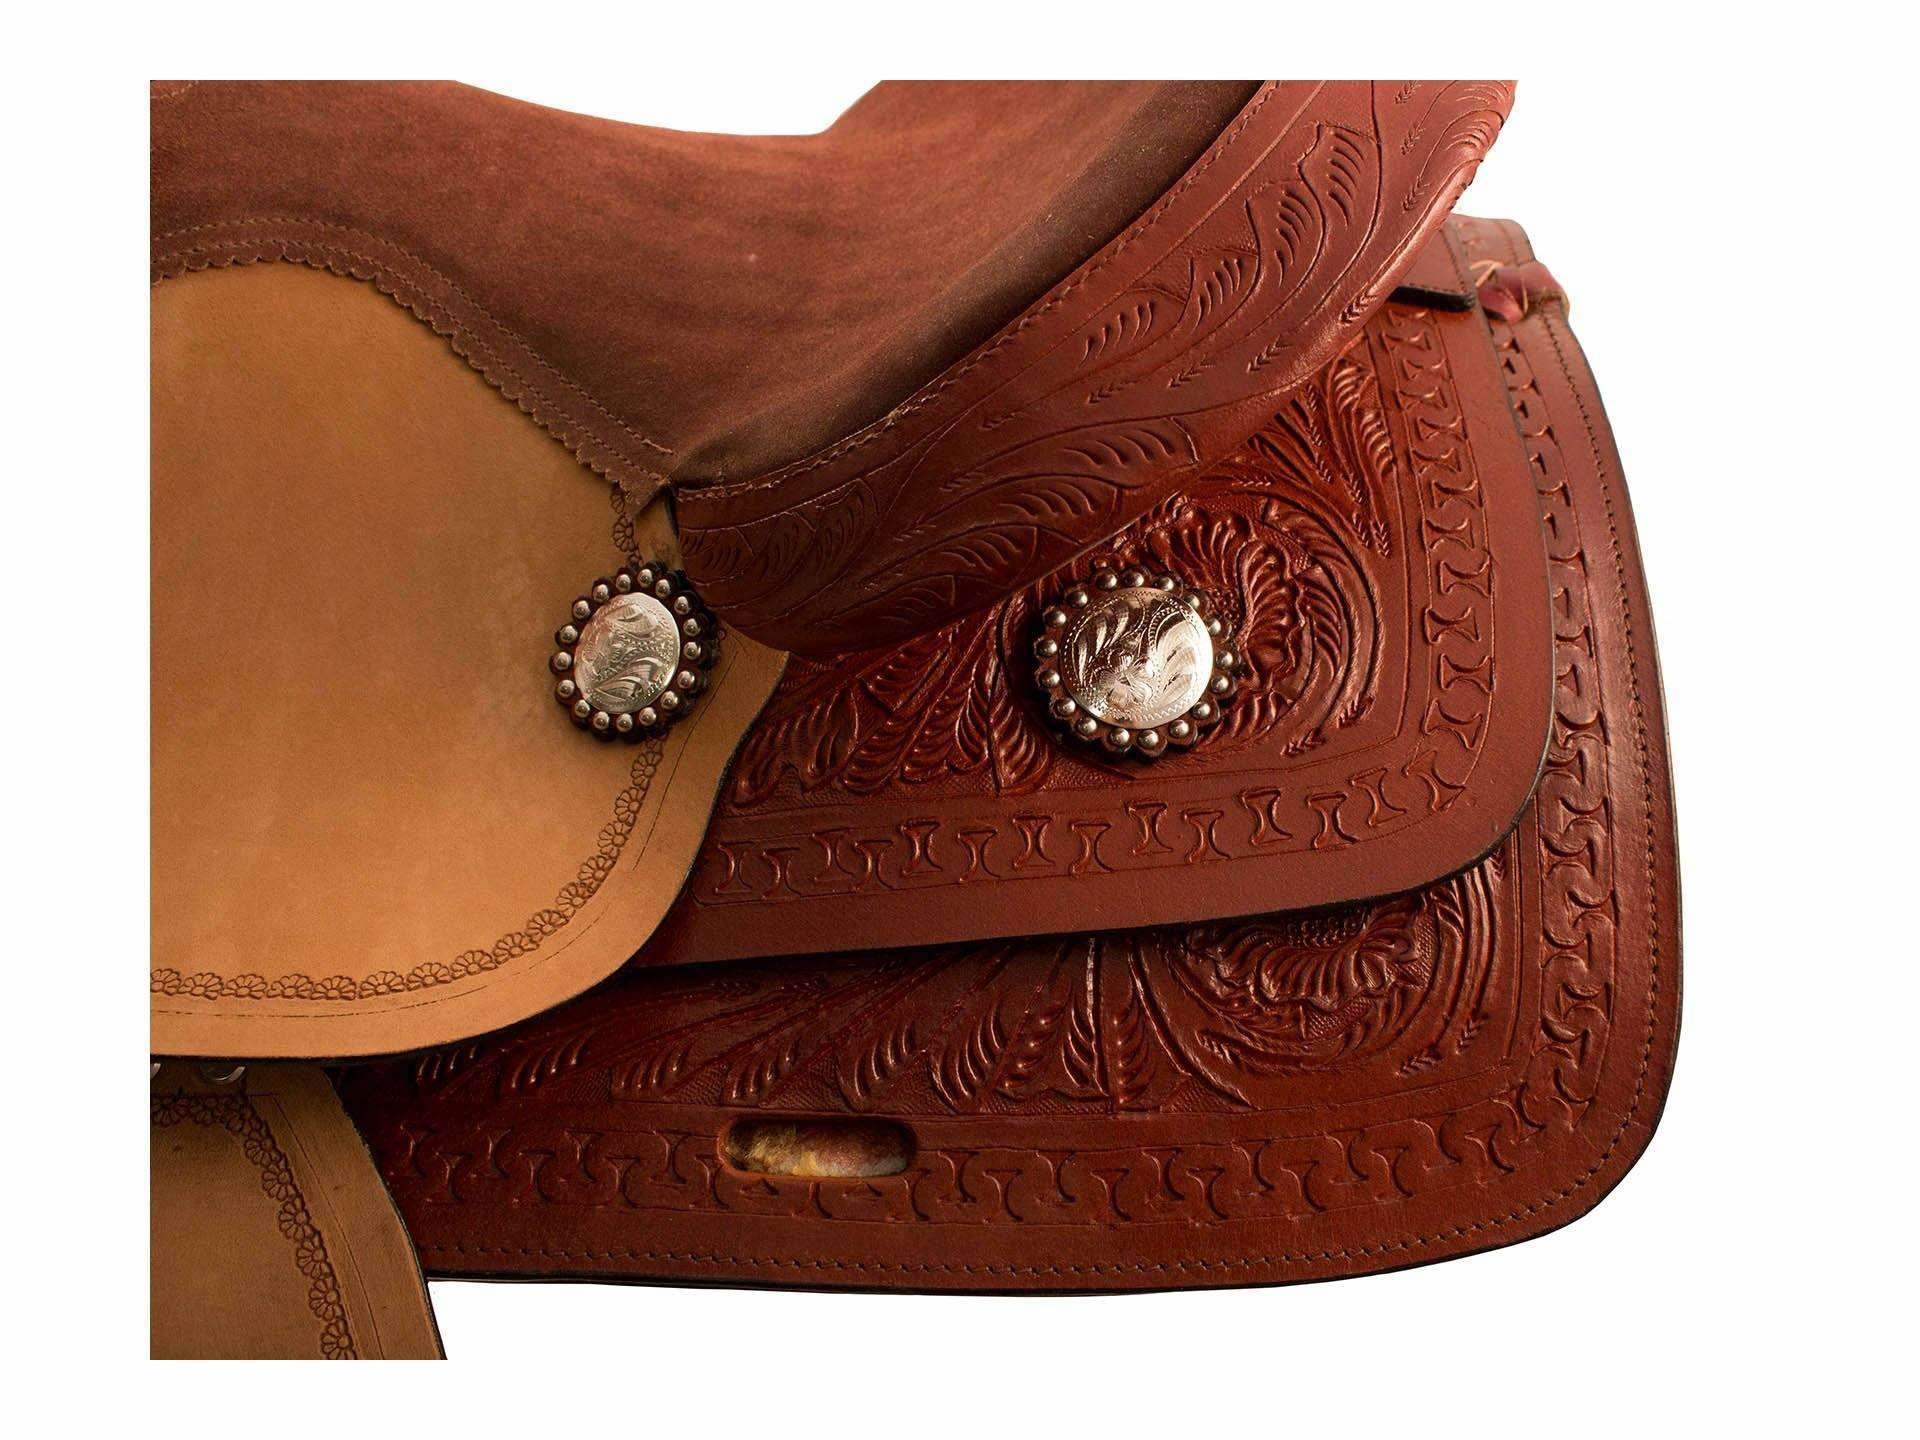 1920x1440 Tahoe Tooled Leather Western Trail Saddles Set of 6 items Closeout